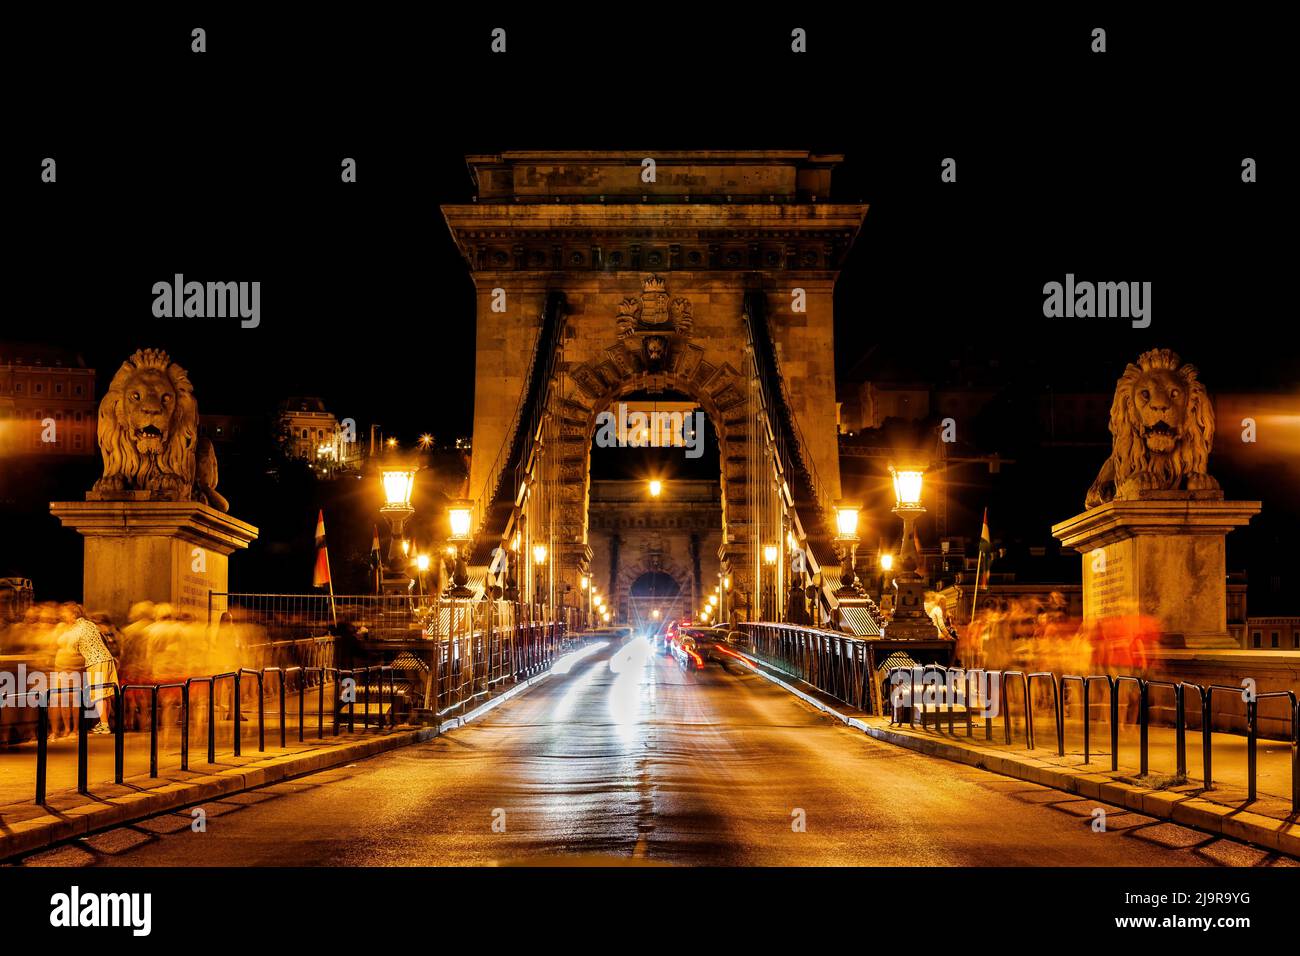 Szechenyi Chain Bridge at night in city of Budapest in Hungary. Pedestrian and road bridge that with two lion sculptures, spans River Danube between B Stock Photo